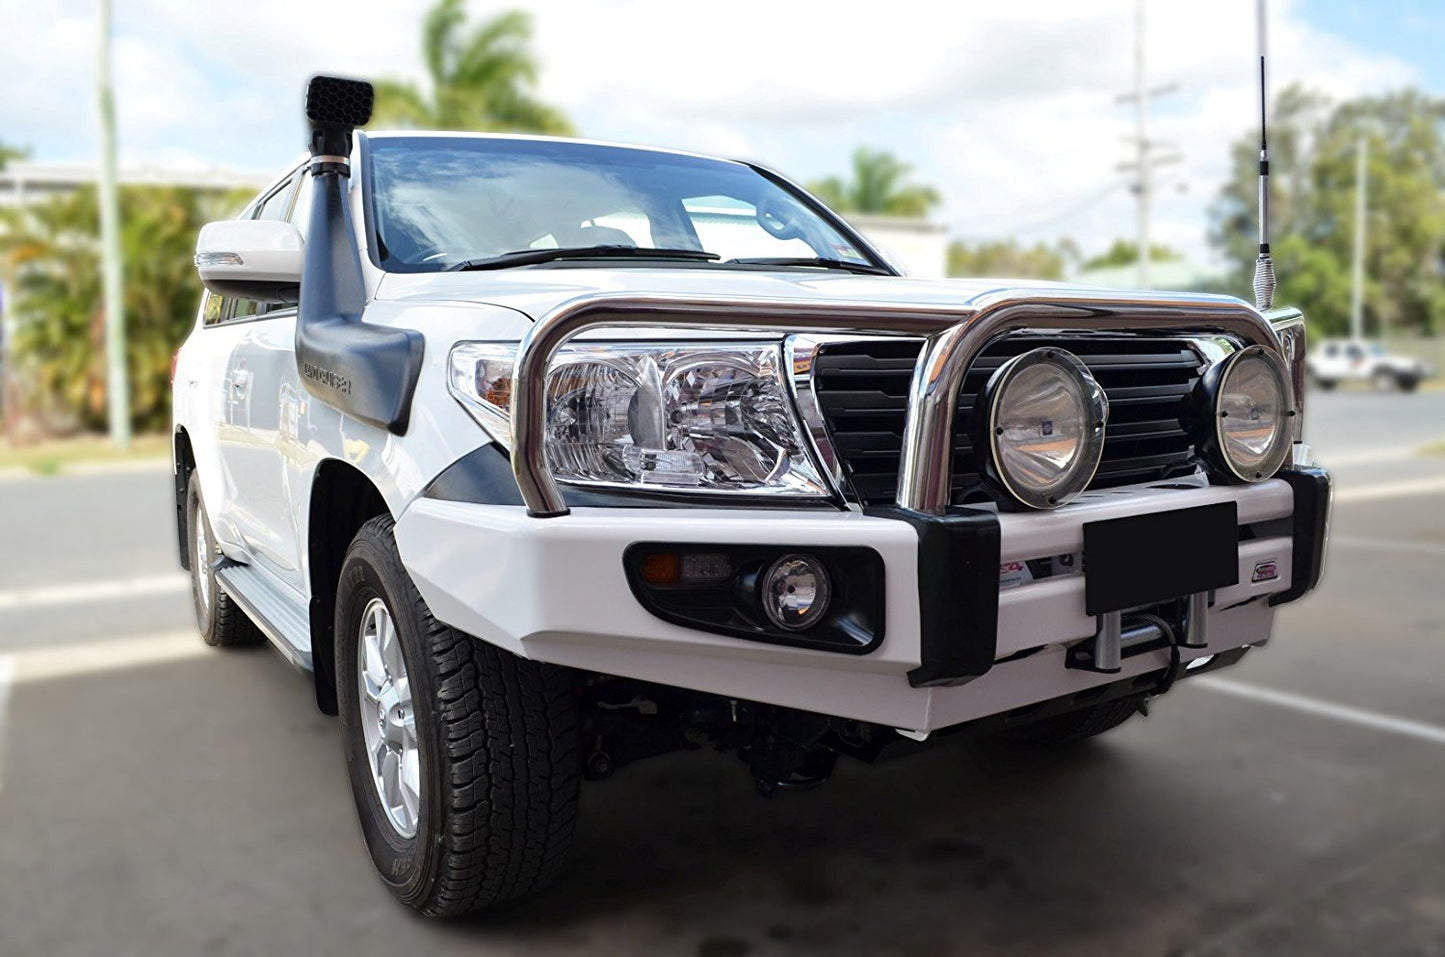 Dobinsons 4x4 Stainless Loop Deluxe Bullbar for Toyota Land Cruiser 200 Series 2008 to 2015 Only(BU59-3688)